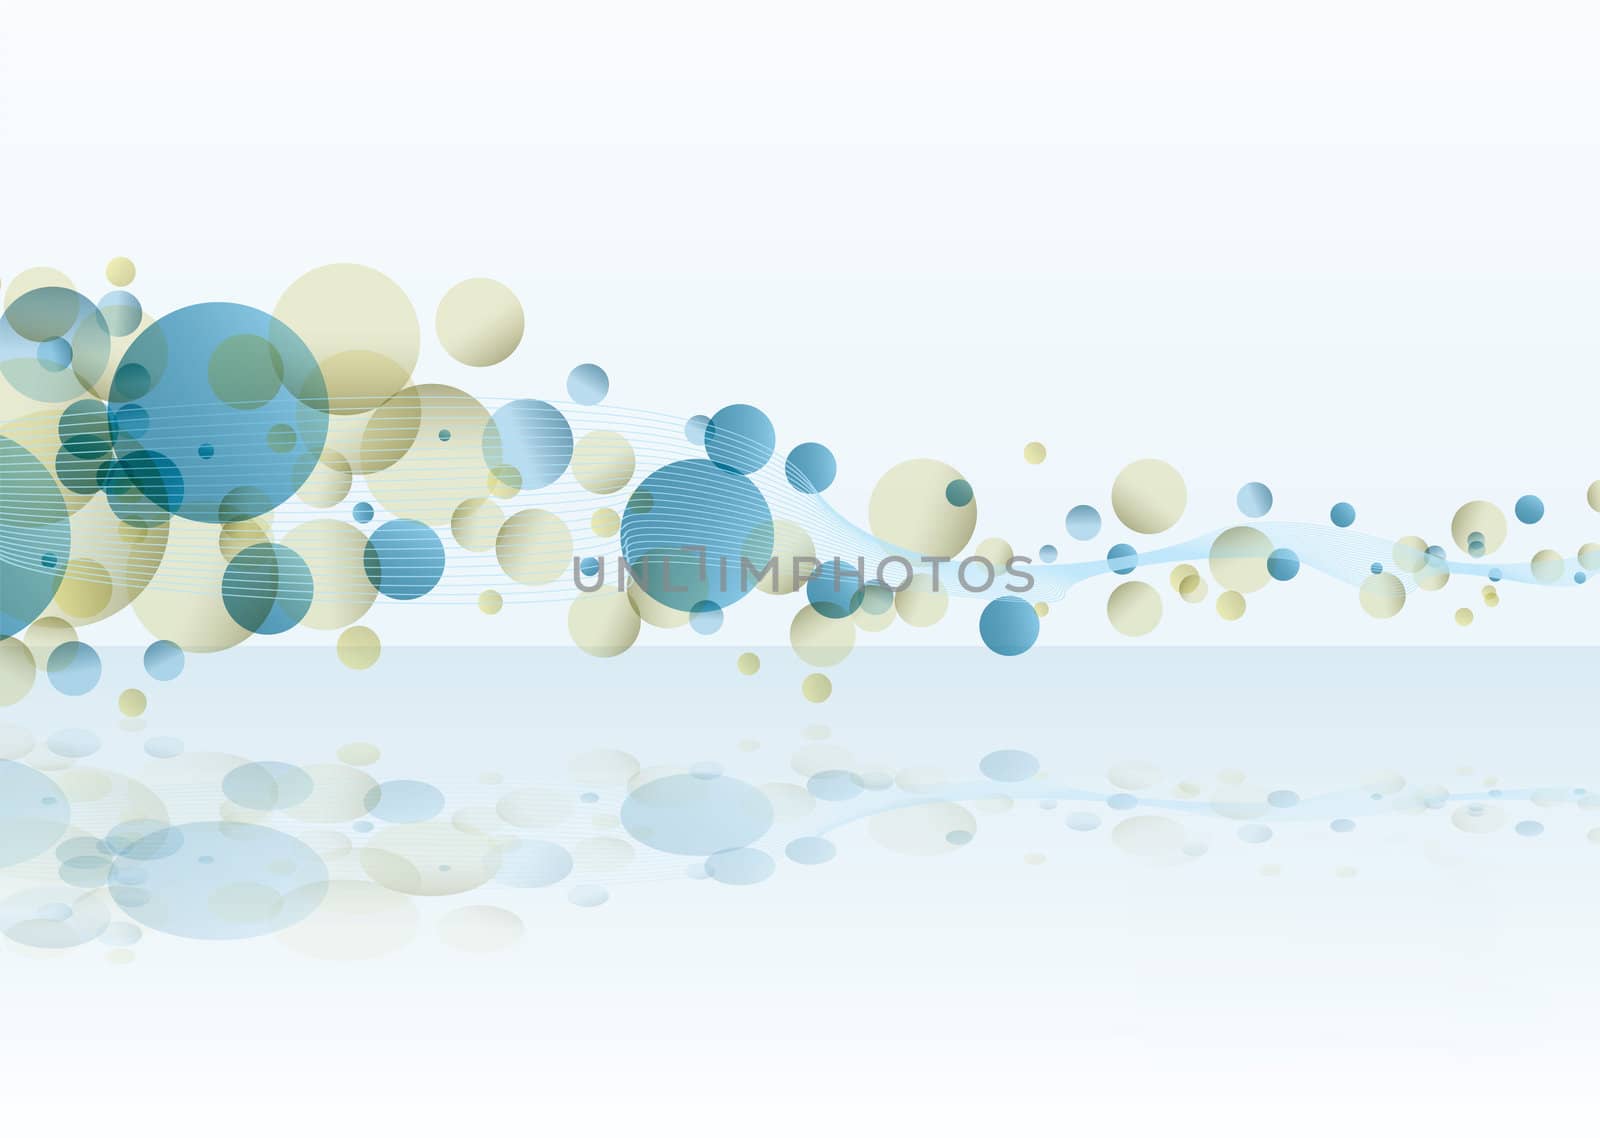 Subtle white background with transparent colored bubbles and wavy line